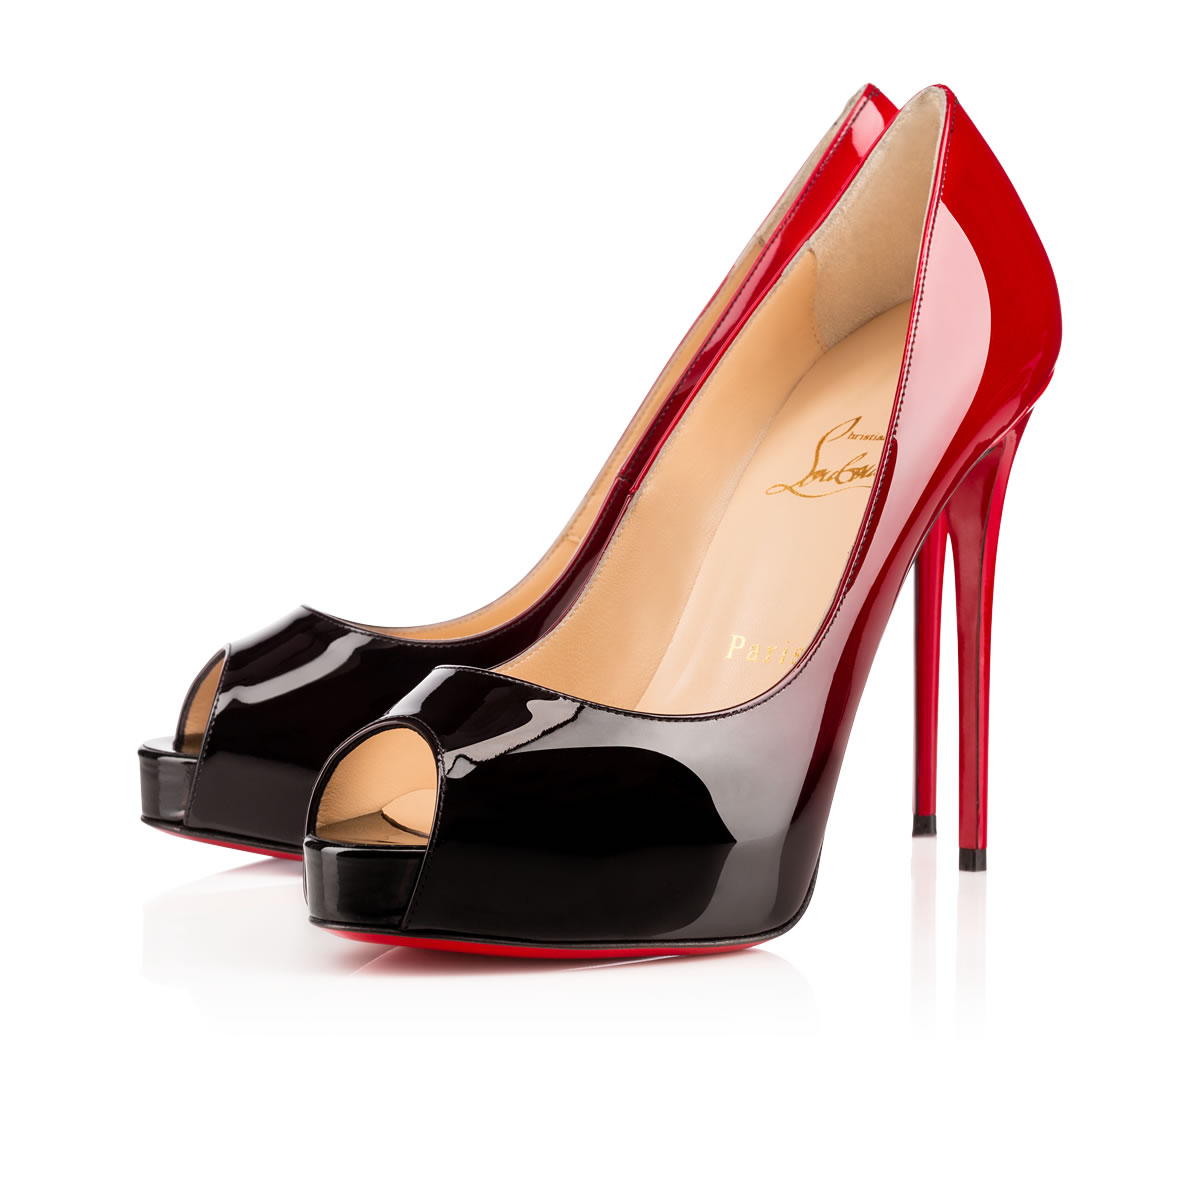 HOLD Christian Louboutin patent leather heel 120mm Beautiful barely worn  (indoors only…